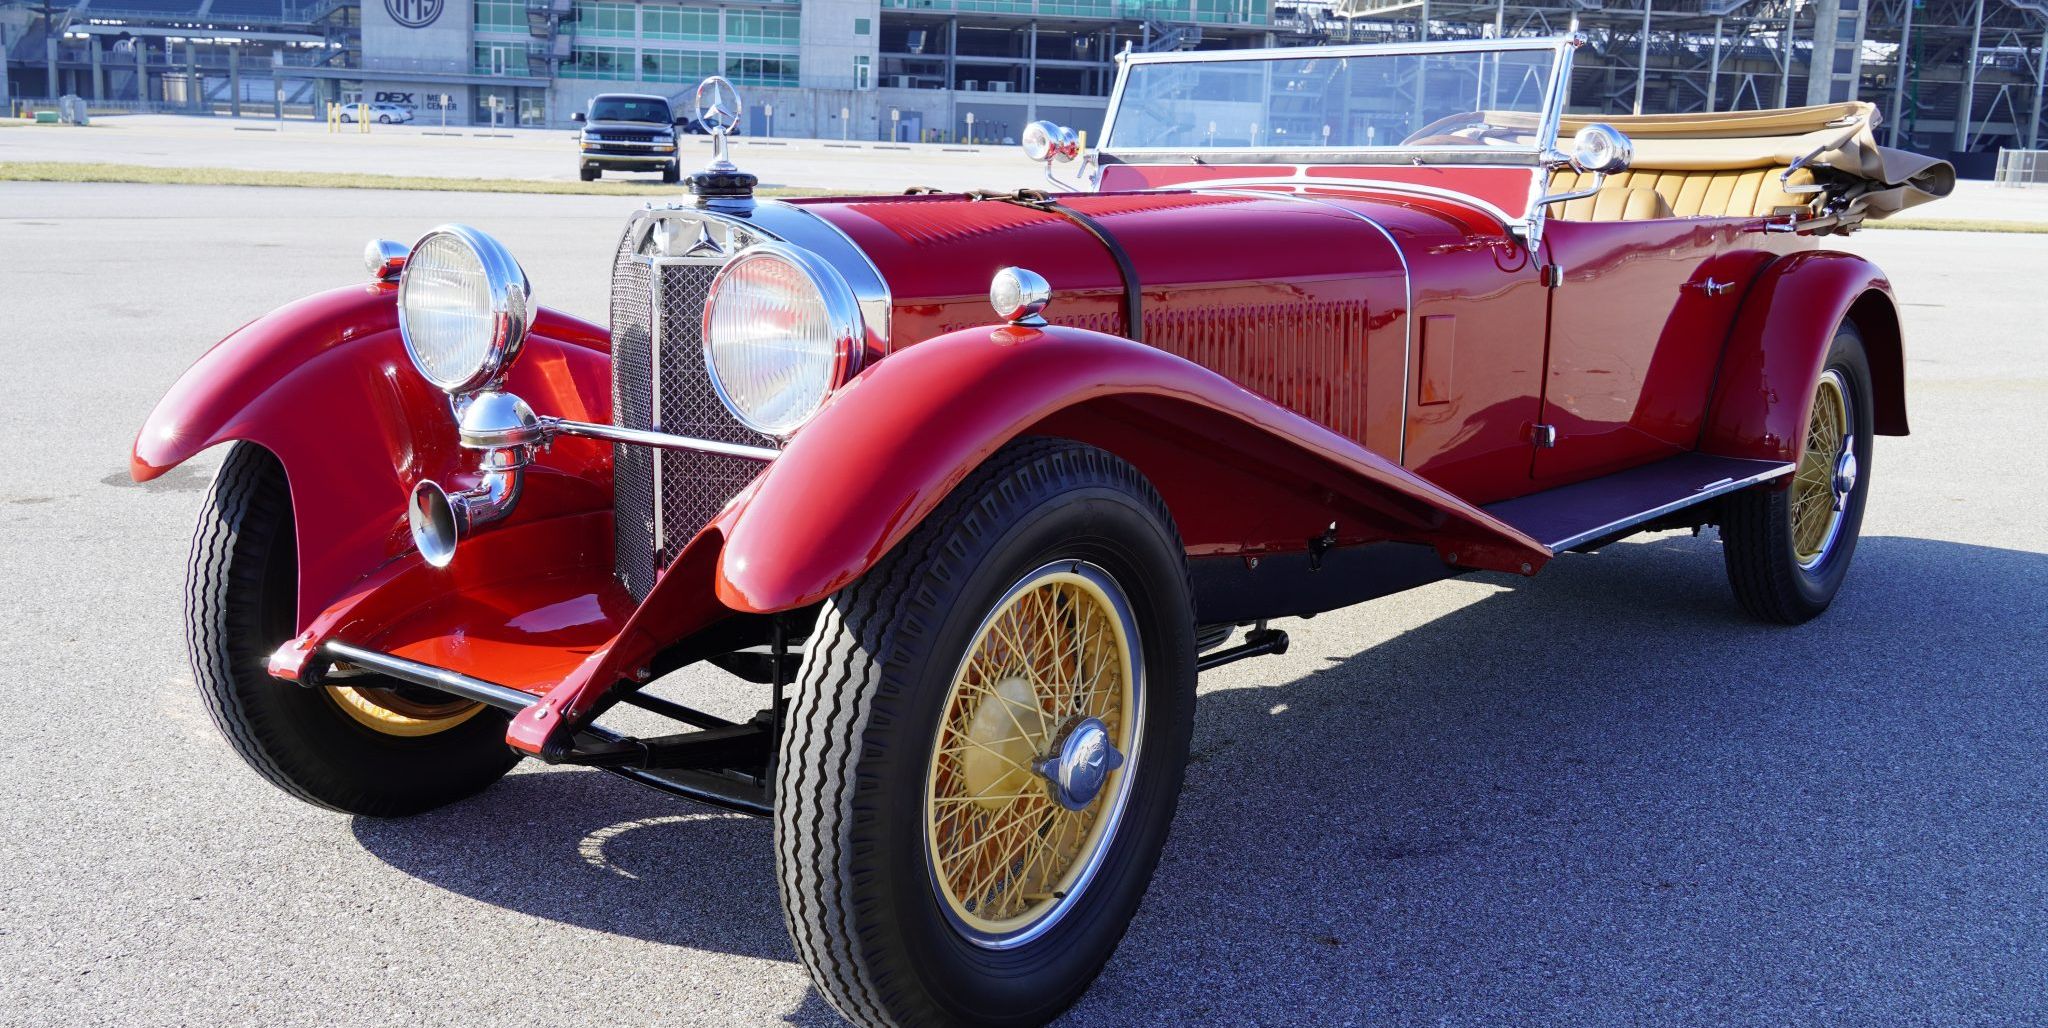 A Rare Pre-War Mercedes Just Sold for a Record-Breaking $2.8 Million on Bring a Trailer